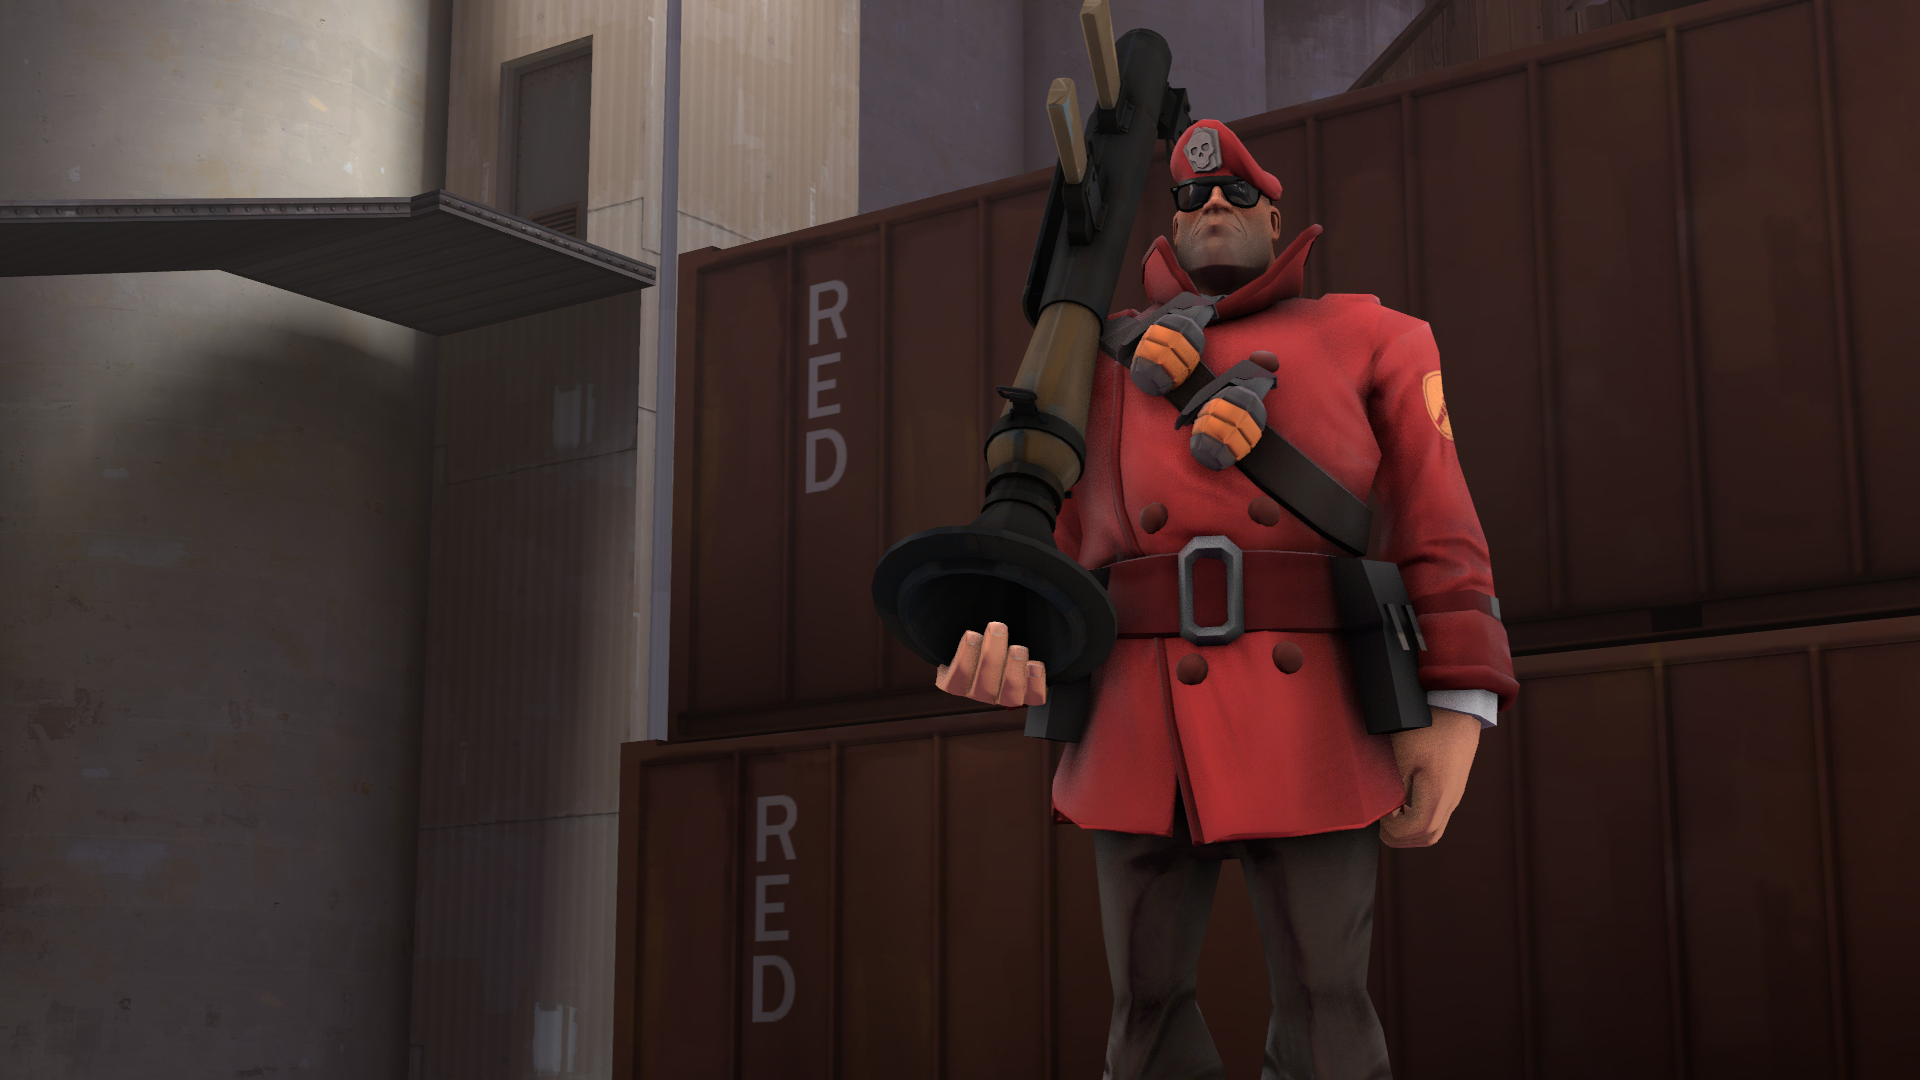 General 1920x1080 Soldier (TF2) Team Fortress 2 PC gaming